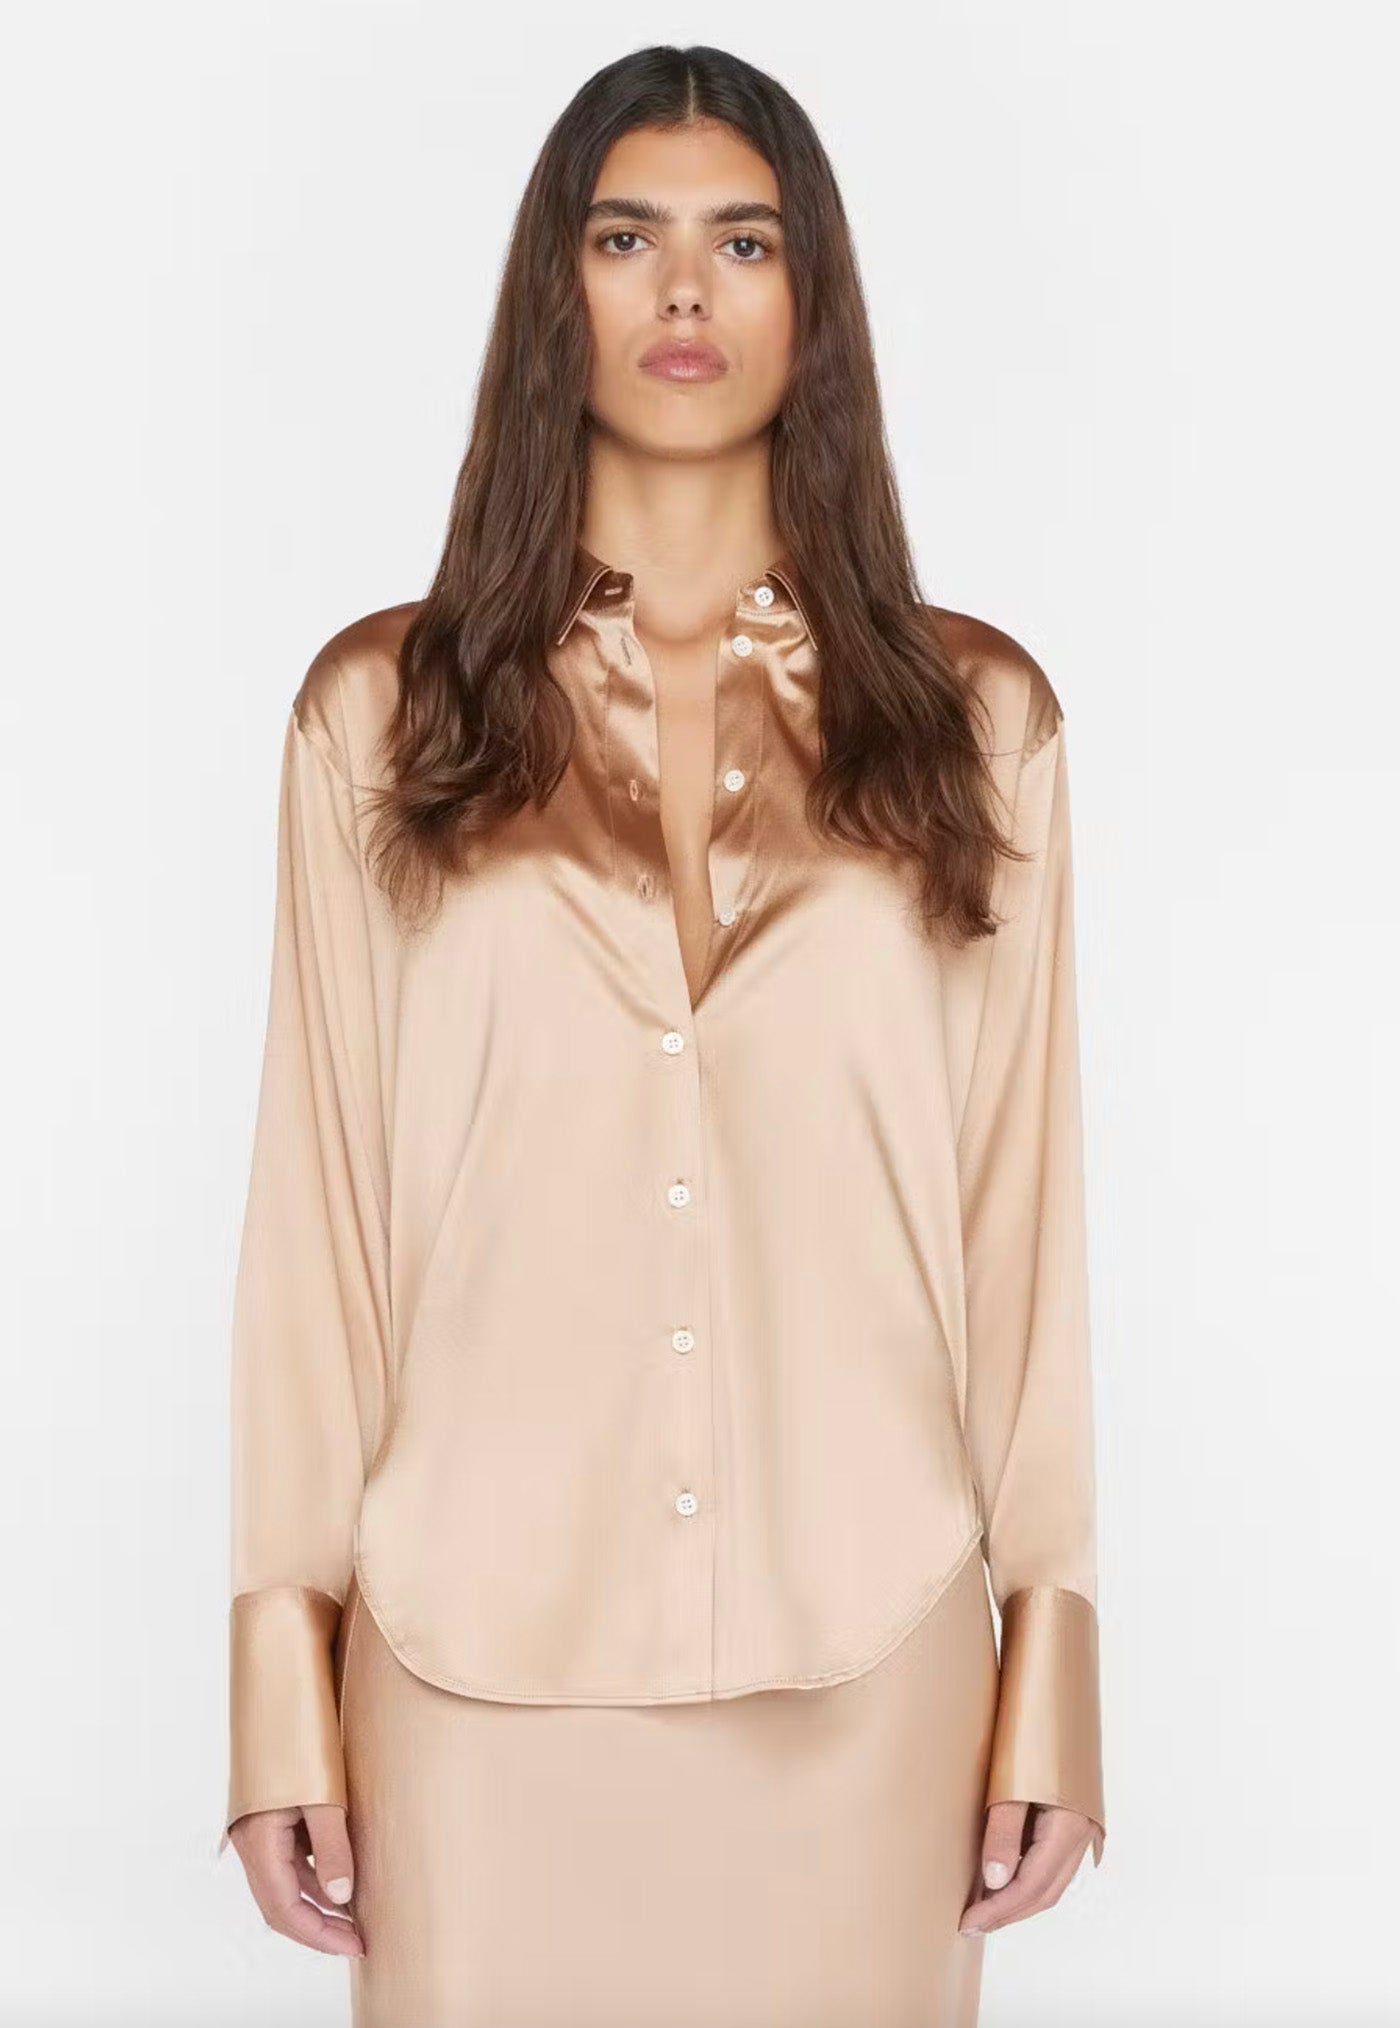 The Standard Shirt - Blush sold by Angel Divine